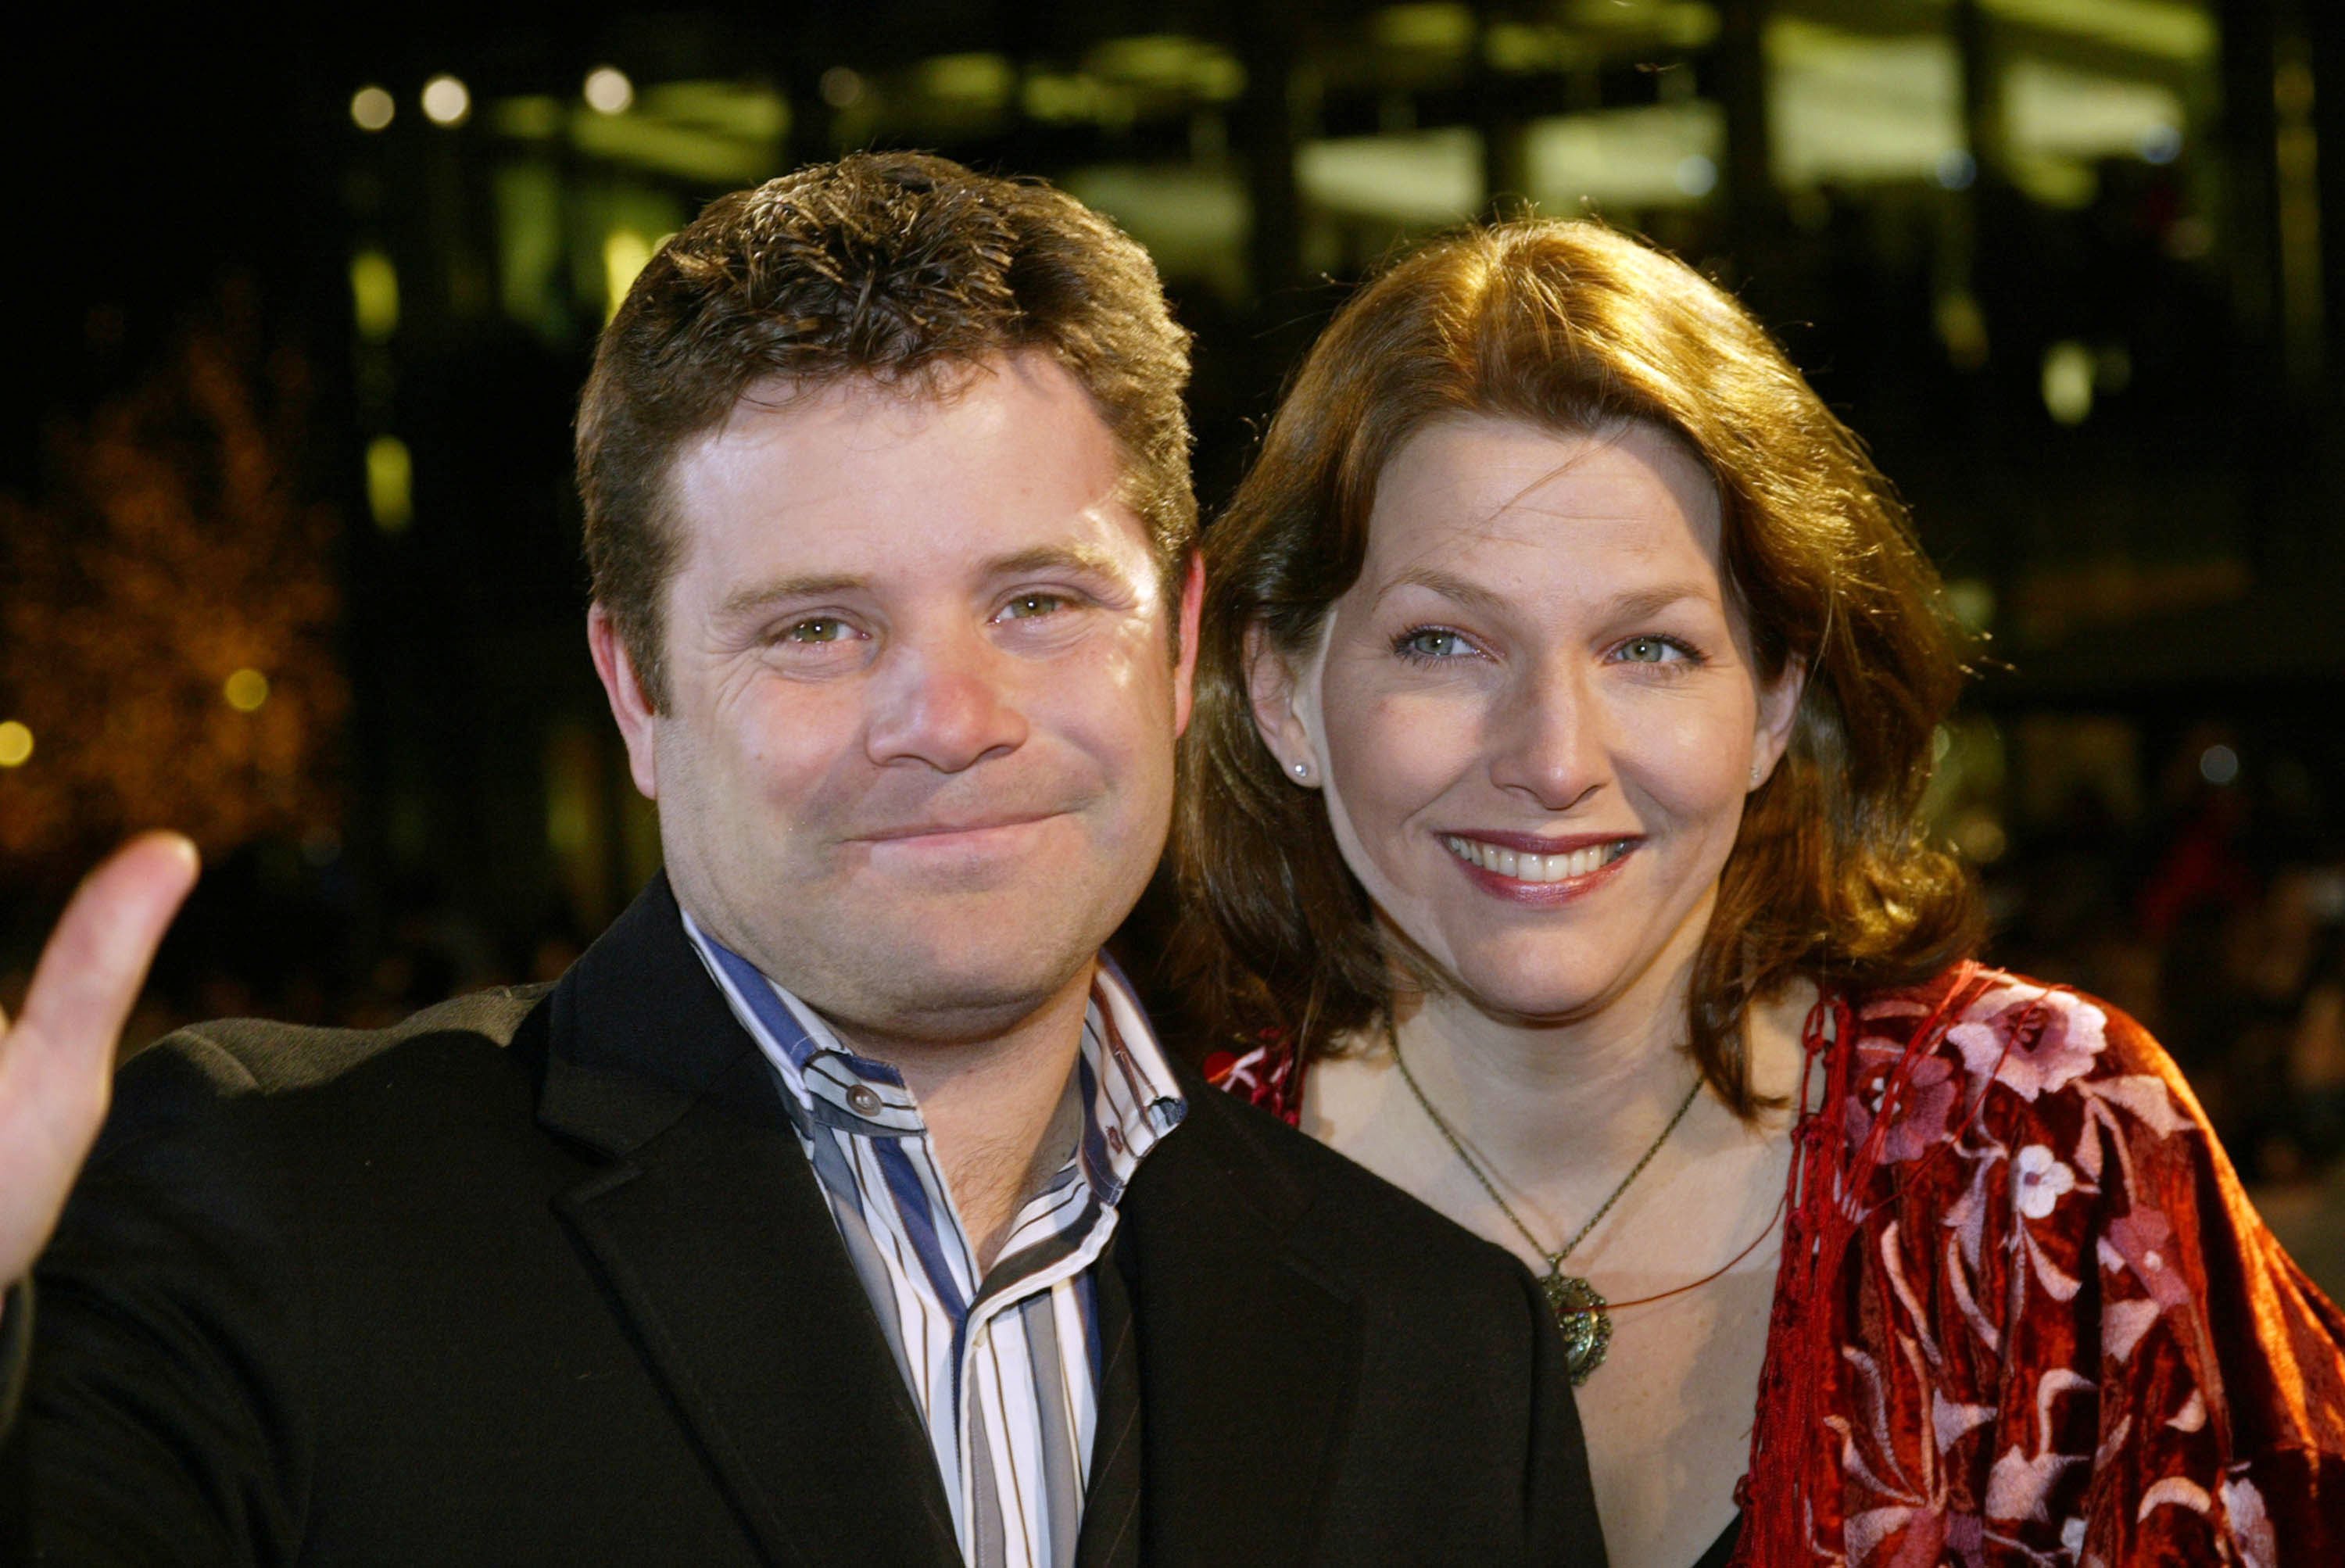 Actor Sean Astin and wife Christine attend "The Lord Of The Rings: The Return Of The King" premiere on December 10, 2003 in Berlin, Germany. | Source: Getty Images